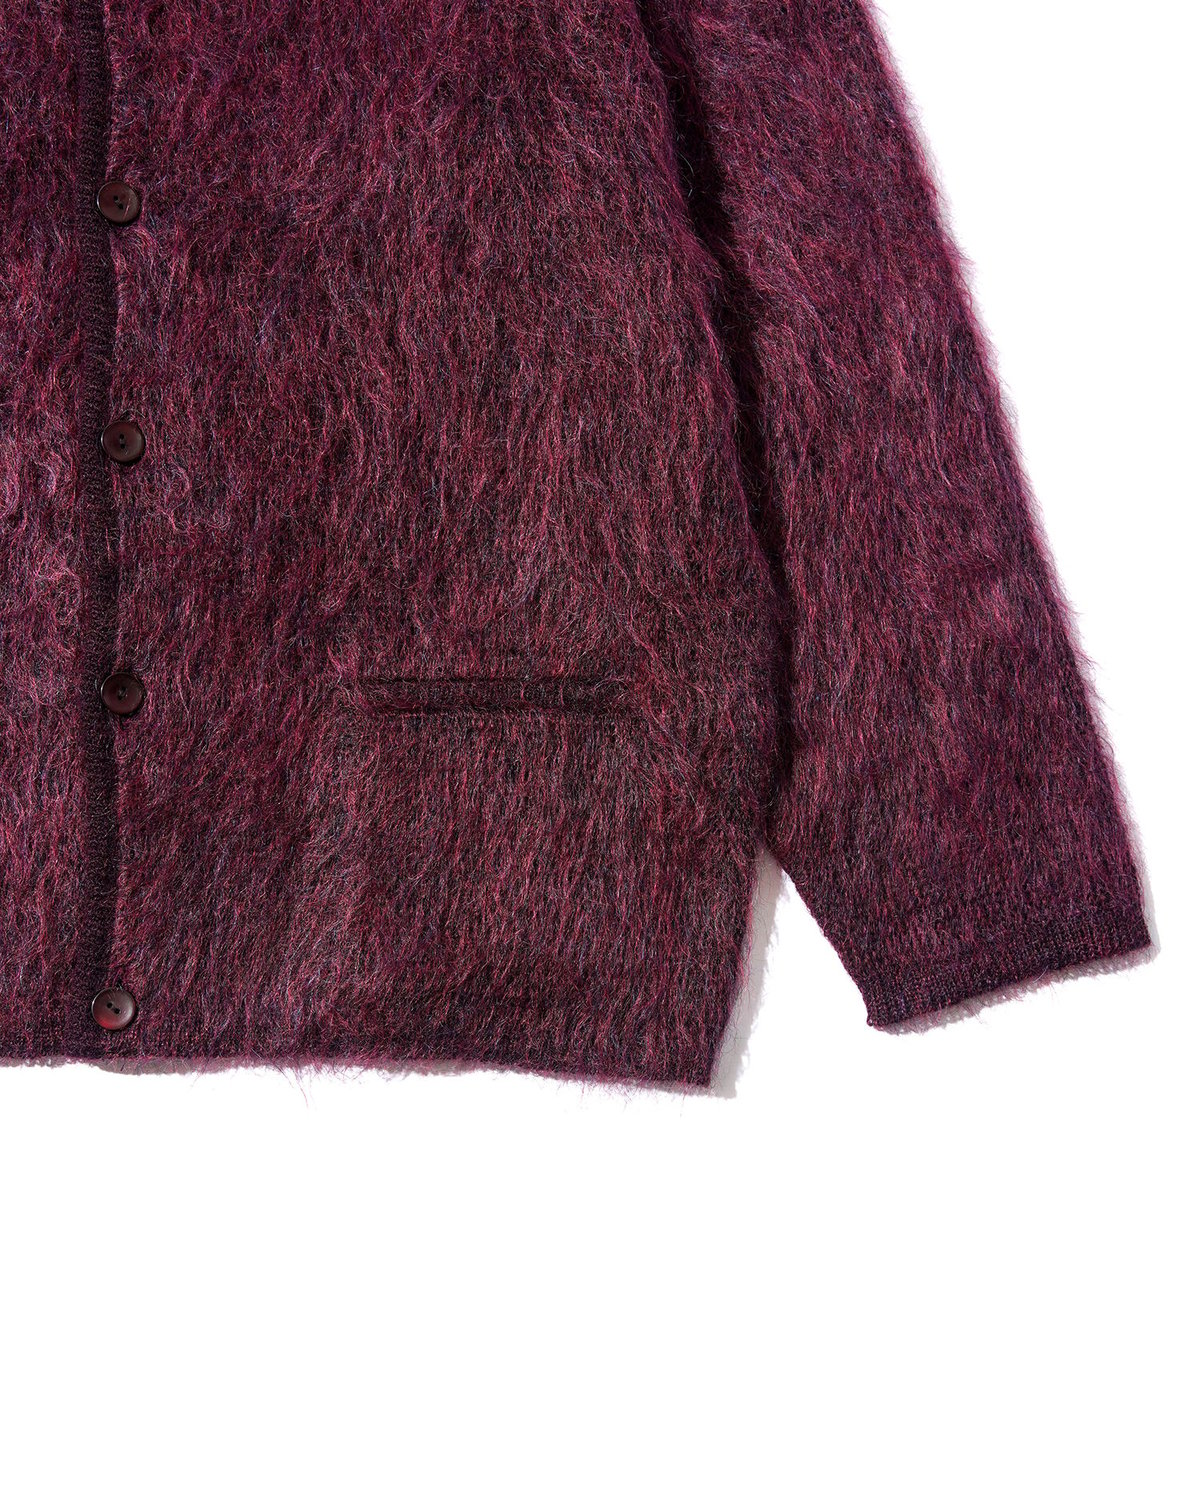 MOHAIR CARDIGAN | MASSES OFFICIAL ONLINE STORE